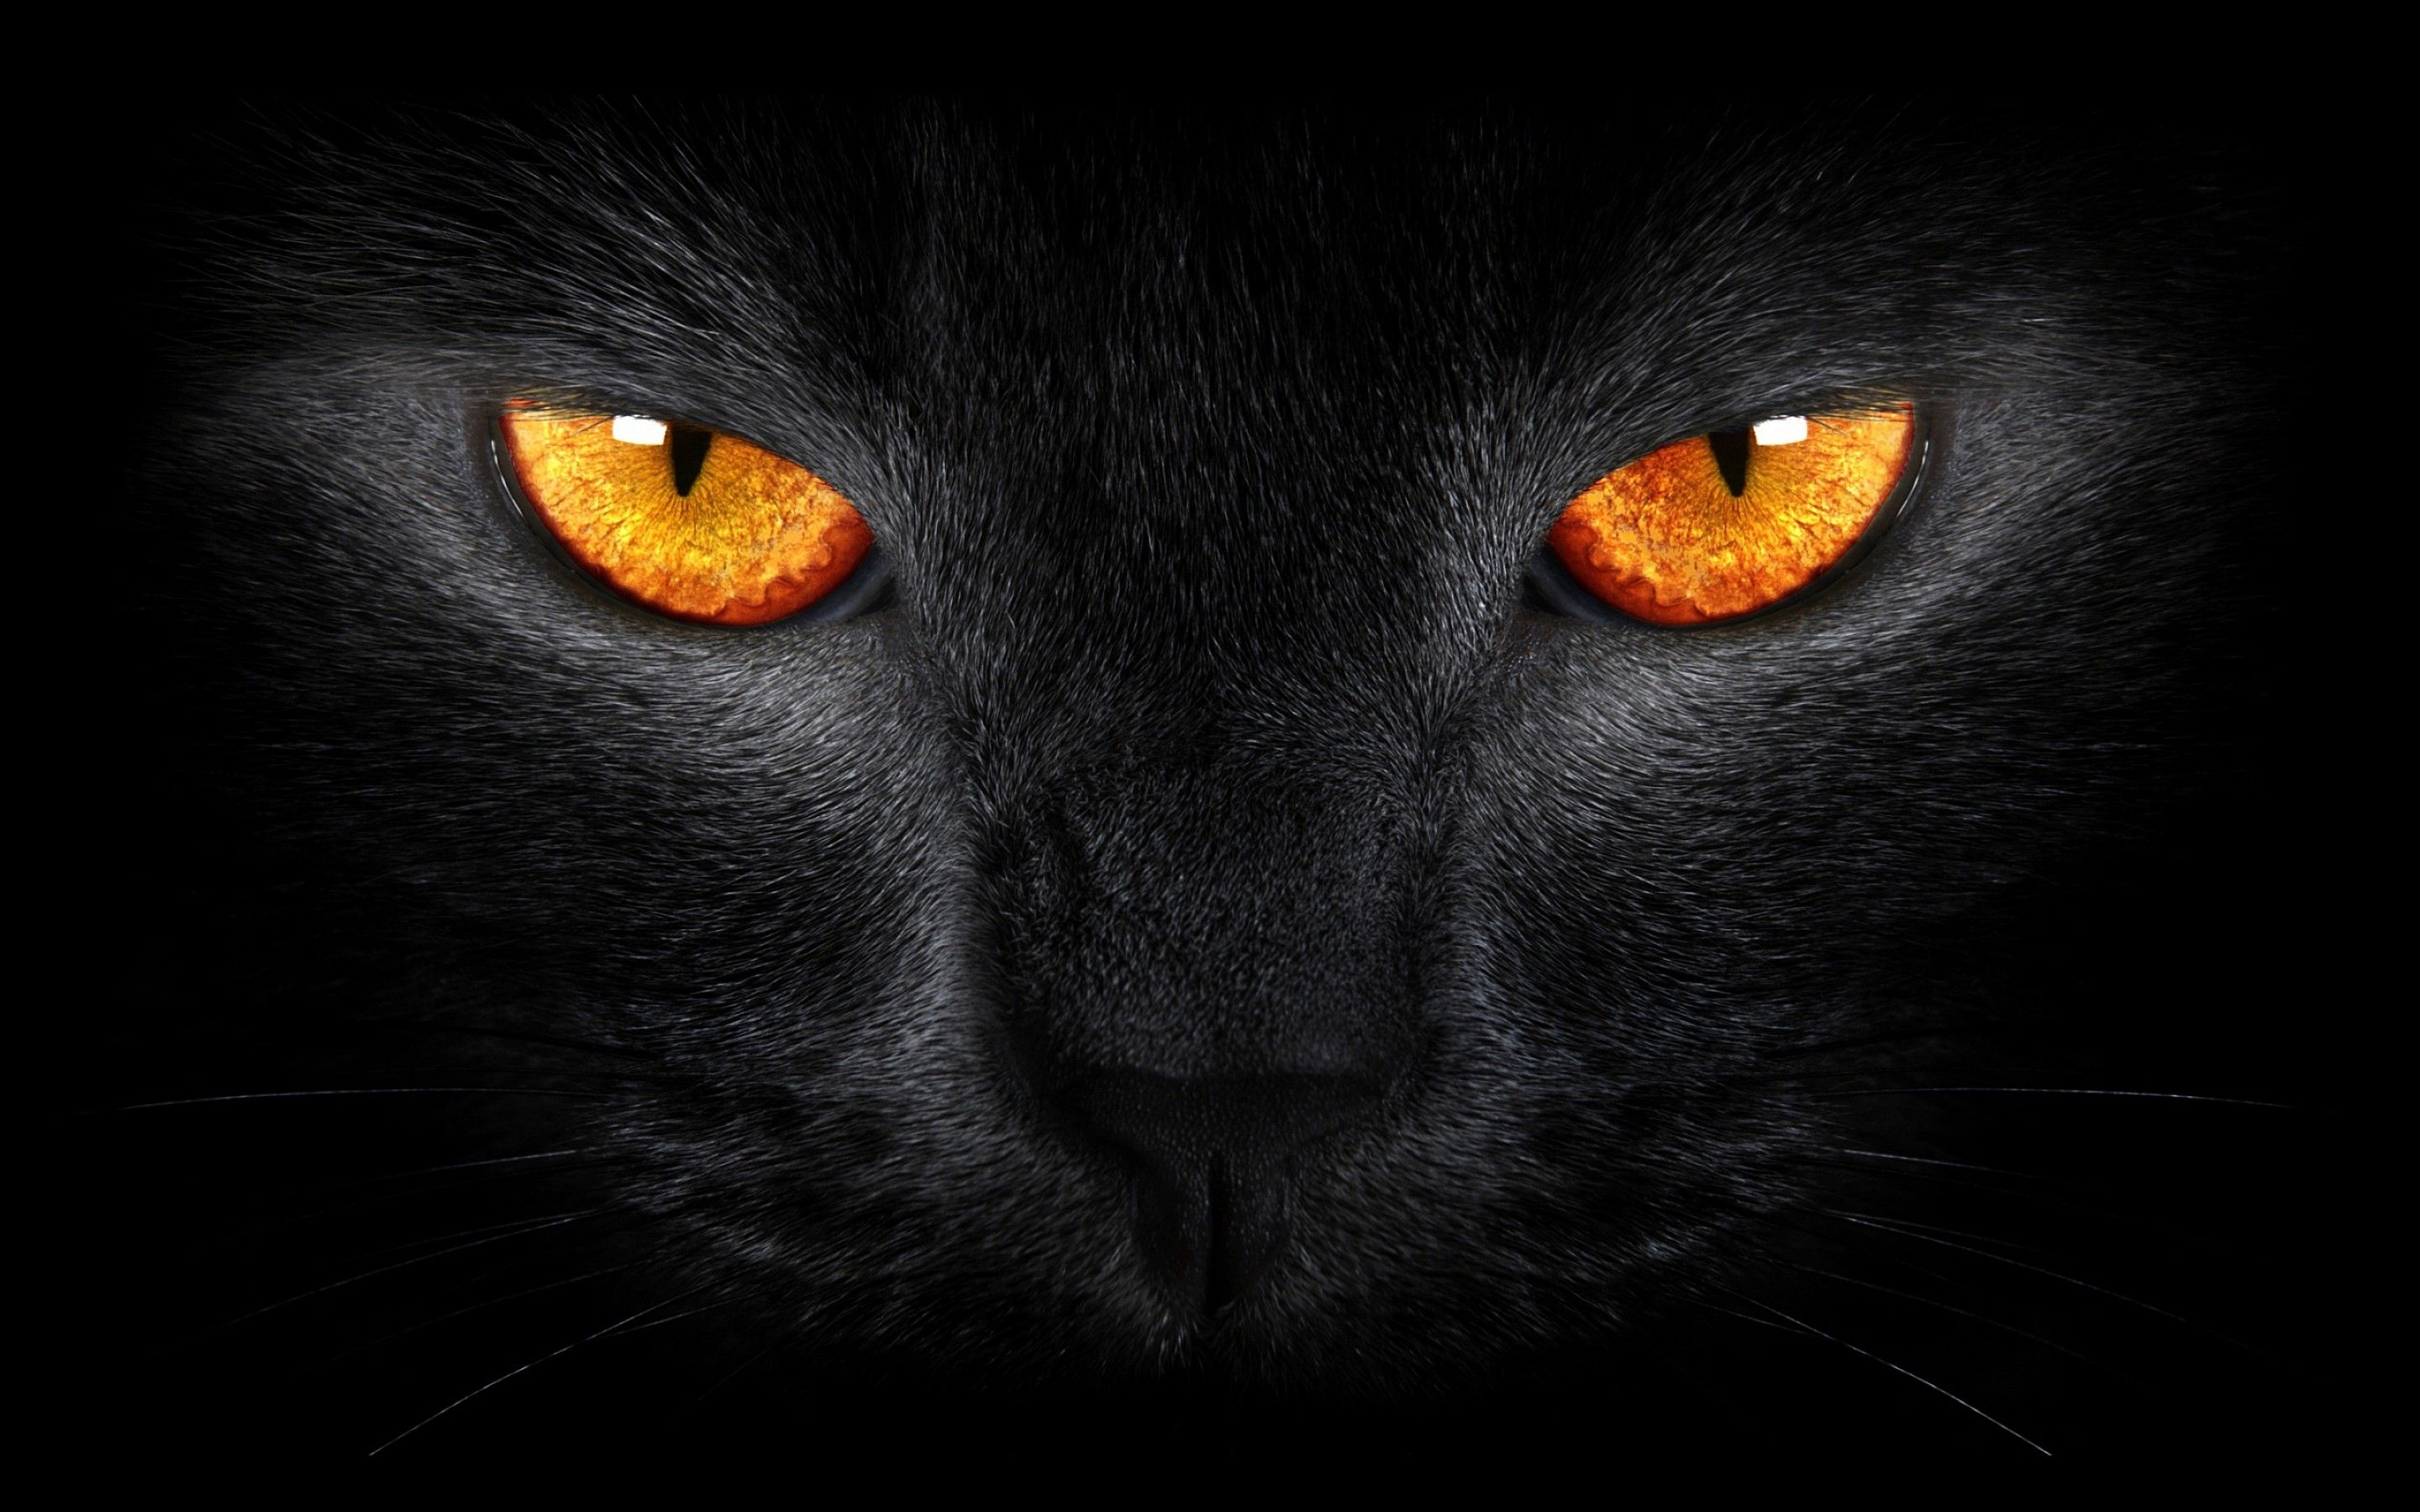 Wallpaper Black Cat, Scary, Yellow eyes, Dark background, Animals,. Wallpaper for iPhone, Android, Mobile and Desktop